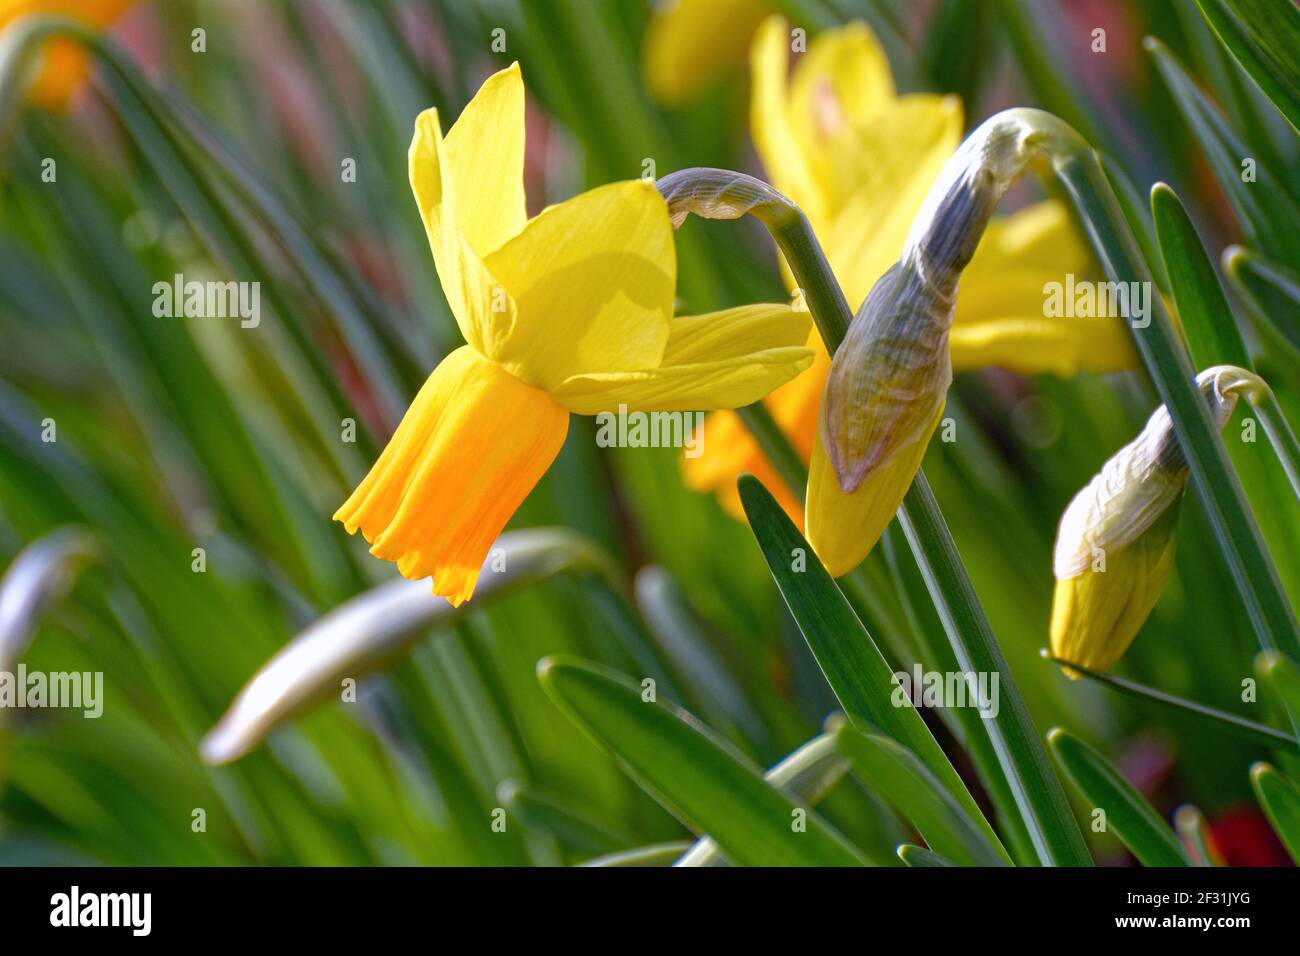 Close up of the Jet Fire variety of narcissus flower Stock Photo